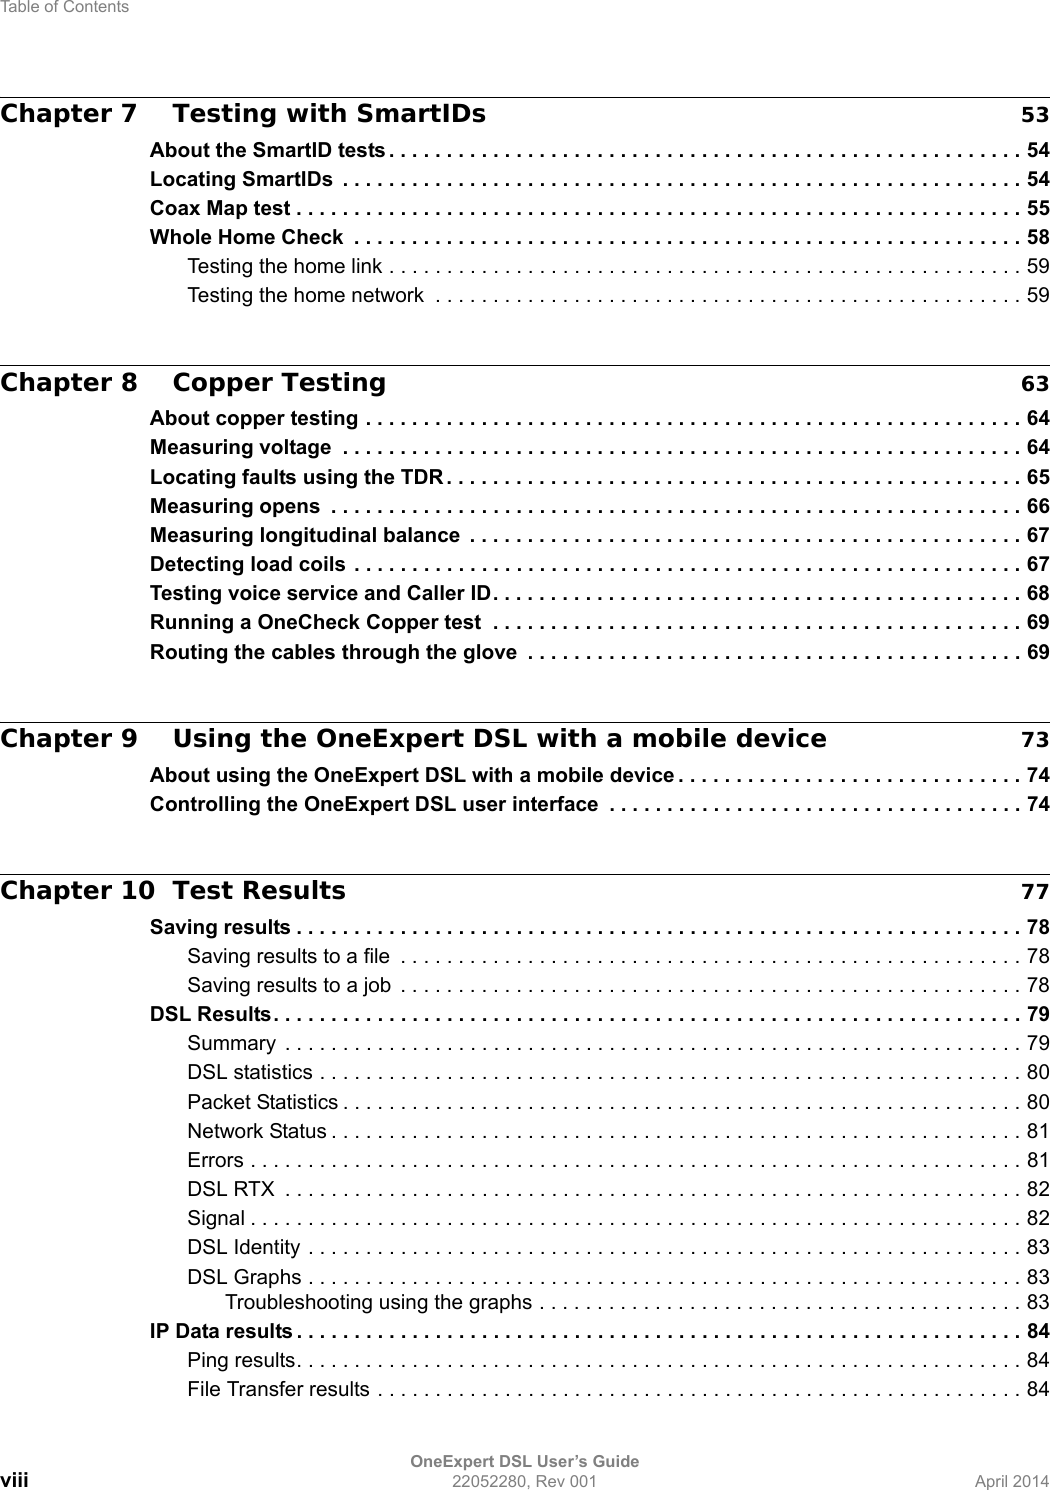 Table of ContentsOneExpert DSL User’s Guideviii 22052280, Rev 001 April 2014Chapter 7 Testing with SmartIDs 53About the SmartID tests . . . . . . . . . . . . . . . . . . . . . . . . . . . . . . . . . . . . . . . . . . . . . . . . . . . . . . . 54Locating SmartIDs  . . . . . . . . . . . . . . . . . . . . . . . . . . . . . . . . . . . . . . . . . . . . . . . . . . . . . . . . . . . 54Coax Map test . . . . . . . . . . . . . . . . . . . . . . . . . . . . . . . . . . . . . . . . . . . . . . . . . . . . . . . . . . . . . . . 55Whole Home Check  . . . . . . . . . . . . . . . . . . . . . . . . . . . . . . . . . . . . . . . . . . . . . . . . . . . . . . . . . . 58Testing the home link . . . . . . . . . . . . . . . . . . . . . . . . . . . . . . . . . . . . . . . . . . . . . . . . . . . . . . . 59Testing the home network  . . . . . . . . . . . . . . . . . . . . . . . . . . . . . . . . . . . . . . . . . . . . . . . . . . . 59Chapter 8 Copper Testing 63About copper testing . . . . . . . . . . . . . . . . . . . . . . . . . . . . . . . . . . . . . . . . . . . . . . . . . . . . . . . . . 64Measuring voltage  . . . . . . . . . . . . . . . . . . . . . . . . . . . . . . . . . . . . . . . . . . . . . . . . . . . . . . . . . . . 64Locating faults using the TDR . . . . . . . . . . . . . . . . . . . . . . . . . . . . . . . . . . . . . . . . . . . . . . . . . . 65Measuring opens  . . . . . . . . . . . . . . . . . . . . . . . . . . . . . . . . . . . . . . . . . . . . . . . . . . . . . . . . . . . . 66Measuring longitudinal balance  . . . . . . . . . . . . . . . . . . . . . . . . . . . . . . . . . . . . . . . . . . . . . . . . 67Detecting load coils . . . . . . . . . . . . . . . . . . . . . . . . . . . . . . . . . . . . . . . . . . . . . . . . . . . . . . . . . . 67Testing voice service and Caller ID. . . . . . . . . . . . . . . . . . . . . . . . . . . . . . . . . . . . . . . . . . . . . . 68Running a OneCheck Copper test  . . . . . . . . . . . . . . . . . . . . . . . . . . . . . . . . . . . . . . . . . . . . . . 69Routing the cables through the glove  . . . . . . . . . . . . . . . . . . . . . . . . . . . . . . . . . . . . . . . . . . . 69Chapter 9 Using the OneExpert DSL with a mobile device 73About using the OneExpert DSL with a mobile device . . . . . . . . . . . . . . . . . . . . . . . . . . . . . . 74Controlling the OneExpert DSL user interface  . . . . . . . . . . . . . . . . . . . . . . . . . . . . . . . . . . . . 74Chapter 10 Test Results 77Saving results . . . . . . . . . . . . . . . . . . . . . . . . . . . . . . . . . . . . . . . . . . . . . . . . . . . . . . . . . . . . . . . 78Saving results to a file  . . . . . . . . . . . . . . . . . . . . . . . . . . . . . . . . . . . . . . . . . . . . . . . . . . . . . . 78Saving results to a job  . . . . . . . . . . . . . . . . . . . . . . . . . . . . . . . . . . . . . . . . . . . . . . . . . . . . . . 78DSL Results. . . . . . . . . . . . . . . . . . . . . . . . . . . . . . . . . . . . . . . . . . . . . . . . . . . . . . . . . . . . . . . . . 79Summary  . . . . . . . . . . . . . . . . . . . . . . . . . . . . . . . . . . . . . . . . . . . . . . . . . . . . . . . . . . . . . . . . 79DSL statistics . . . . . . . . . . . . . . . . . . . . . . . . . . . . . . . . . . . . . . . . . . . . . . . . . . . . . . . . . . . . . 80Packet Statistics . . . . . . . . . . . . . . . . . . . . . . . . . . . . . . . . . . . . . . . . . . . . . . . . . . . . . . . . . . . 80Network Status . . . . . . . . . . . . . . . . . . . . . . . . . . . . . . . . . . . . . . . . . . . . . . . . . . . . . . . . . . . . 81Errors . . . . . . . . . . . . . . . . . . . . . . . . . . . . . . . . . . . . . . . . . . . . . . . . . . . . . . . . . . . . . . . . . . . 81DSL RTX  . . . . . . . . . . . . . . . . . . . . . . . . . . . . . . . . . . . . . . . . . . . . . . . . . . . . . . . . . . . . . . . . 82Signal . . . . . . . . . . . . . . . . . . . . . . . . . . . . . . . . . . . . . . . . . . . . . . . . . . . . . . . . . . . . . . . . . . . 82DSL Identity . . . . . . . . . . . . . . . . . . . . . . . . . . . . . . . . . . . . . . . . . . . . . . . . . . . . . . . . . . . . . . 83DSL Graphs . . . . . . . . . . . . . . . . . . . . . . . . . . . . . . . . . . . . . . . . . . . . . . . . . . . . . . . . . . . . . . 83Troubleshooting using the graphs . . . . . . . . . . . . . . . . . . . . . . . . . . . . . . . . . . . . . . . . . . 83IP Data results . . . . . . . . . . . . . . . . . . . . . . . . . . . . . . . . . . . . . . . . . . . . . . . . . . . . . . . . . . . . . . . 84Ping results. . . . . . . . . . . . . . . . . . . . . . . . . . . . . . . . . . . . . . . . . . . . . . . . . . . . . . . . . . . . . . . 84File Transfer results . . . . . . . . . . . . . . . . . . . . . . . . . . . . . . . . . . . . . . . . . . . . . . . . . . . . . . . . 84